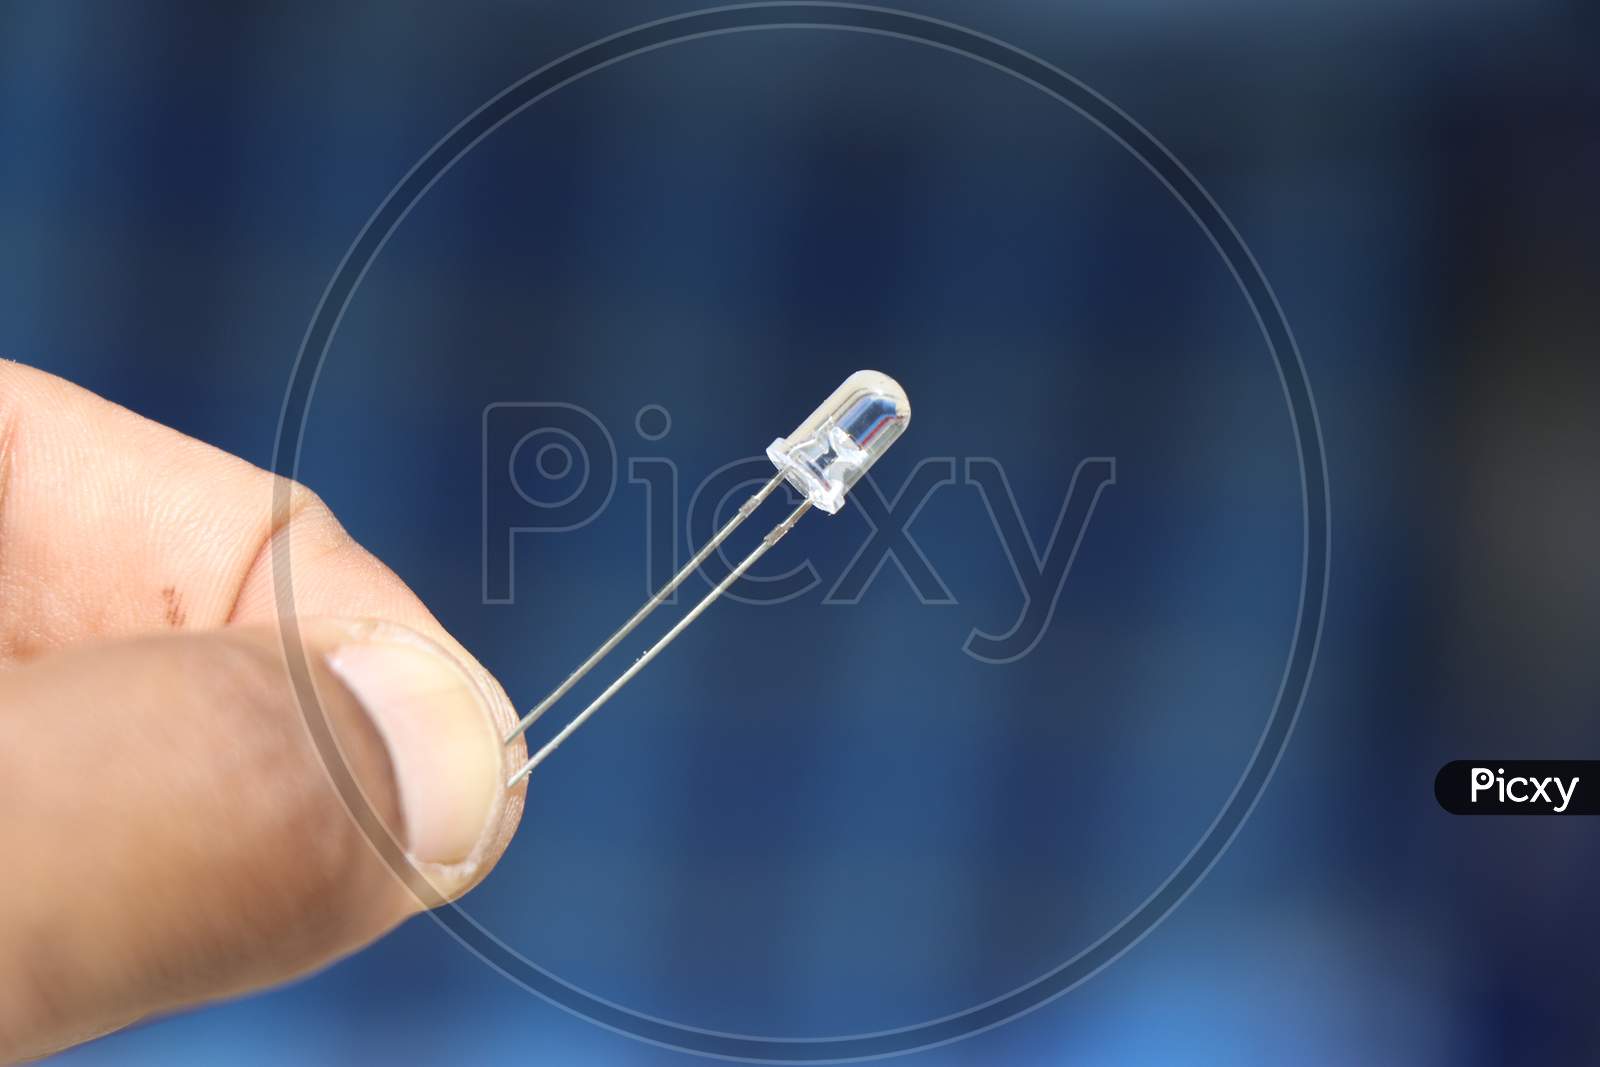 Small Light Emitting Diode Or Led Which Is Electronic Component Held In Short Held In Hand